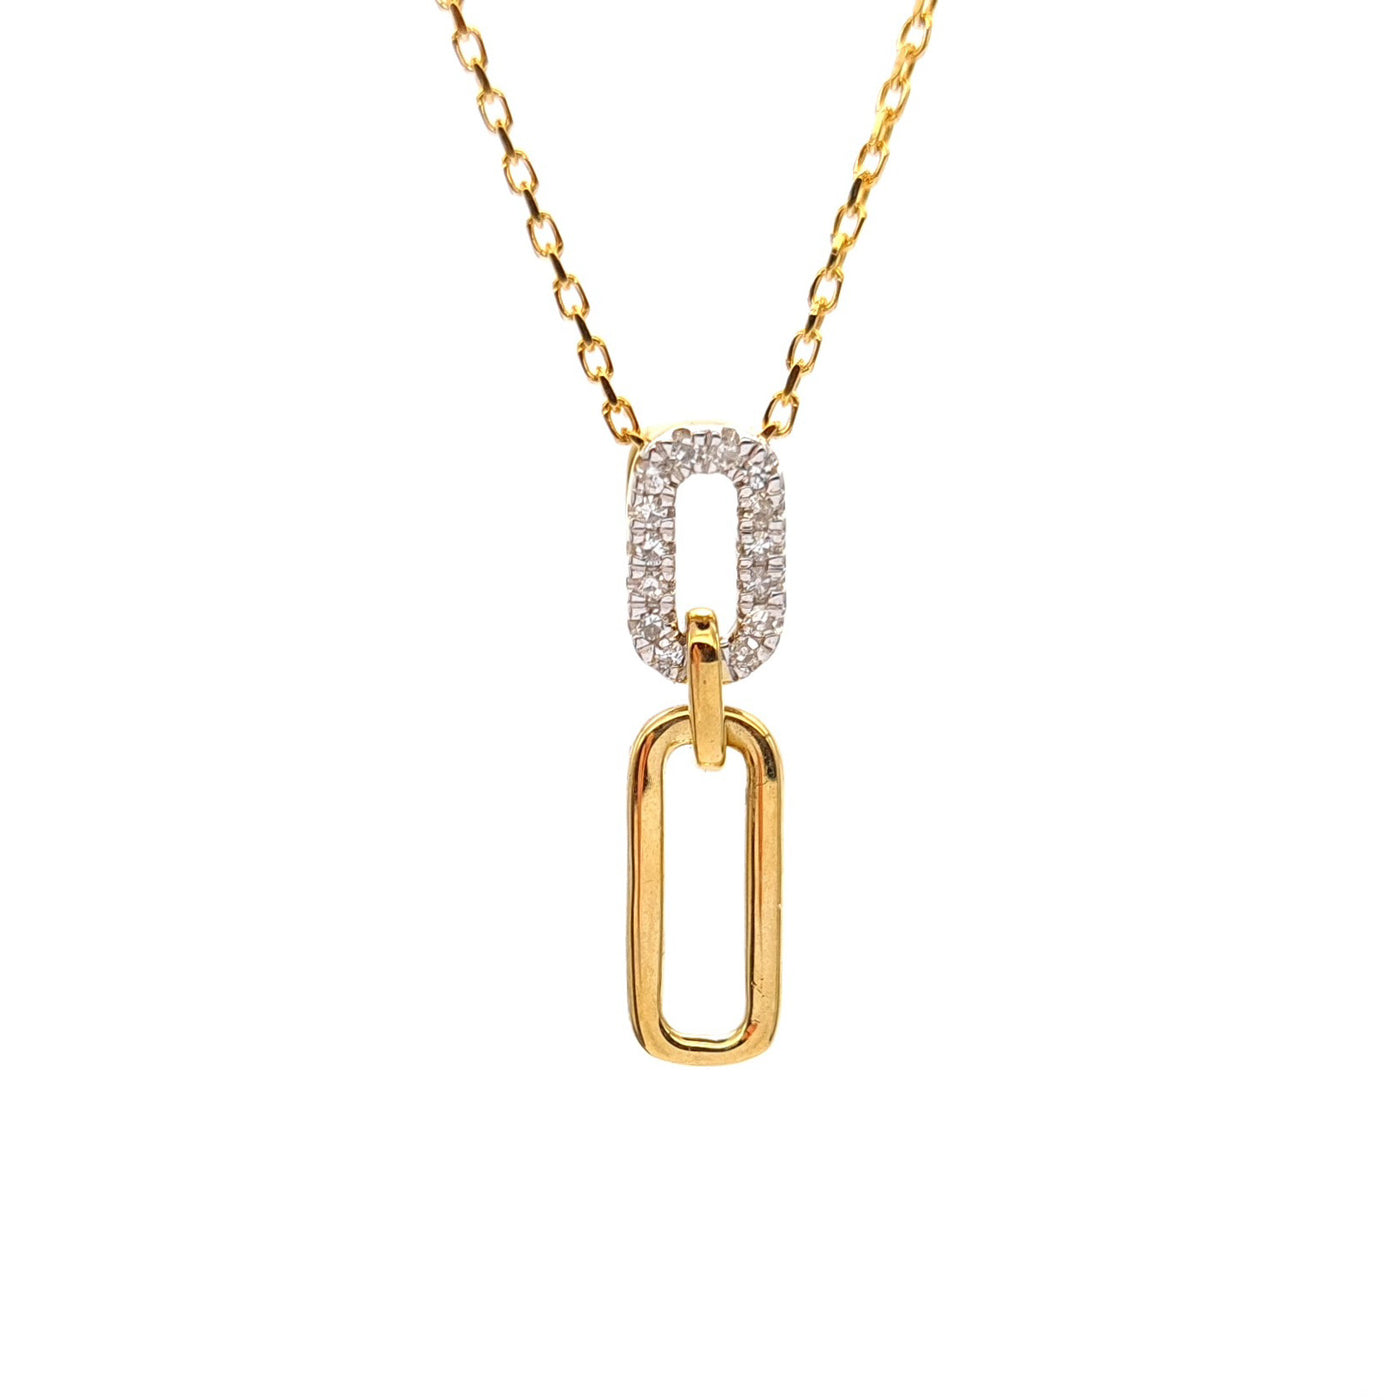 Forever Linked Diamond and Gold Pendant